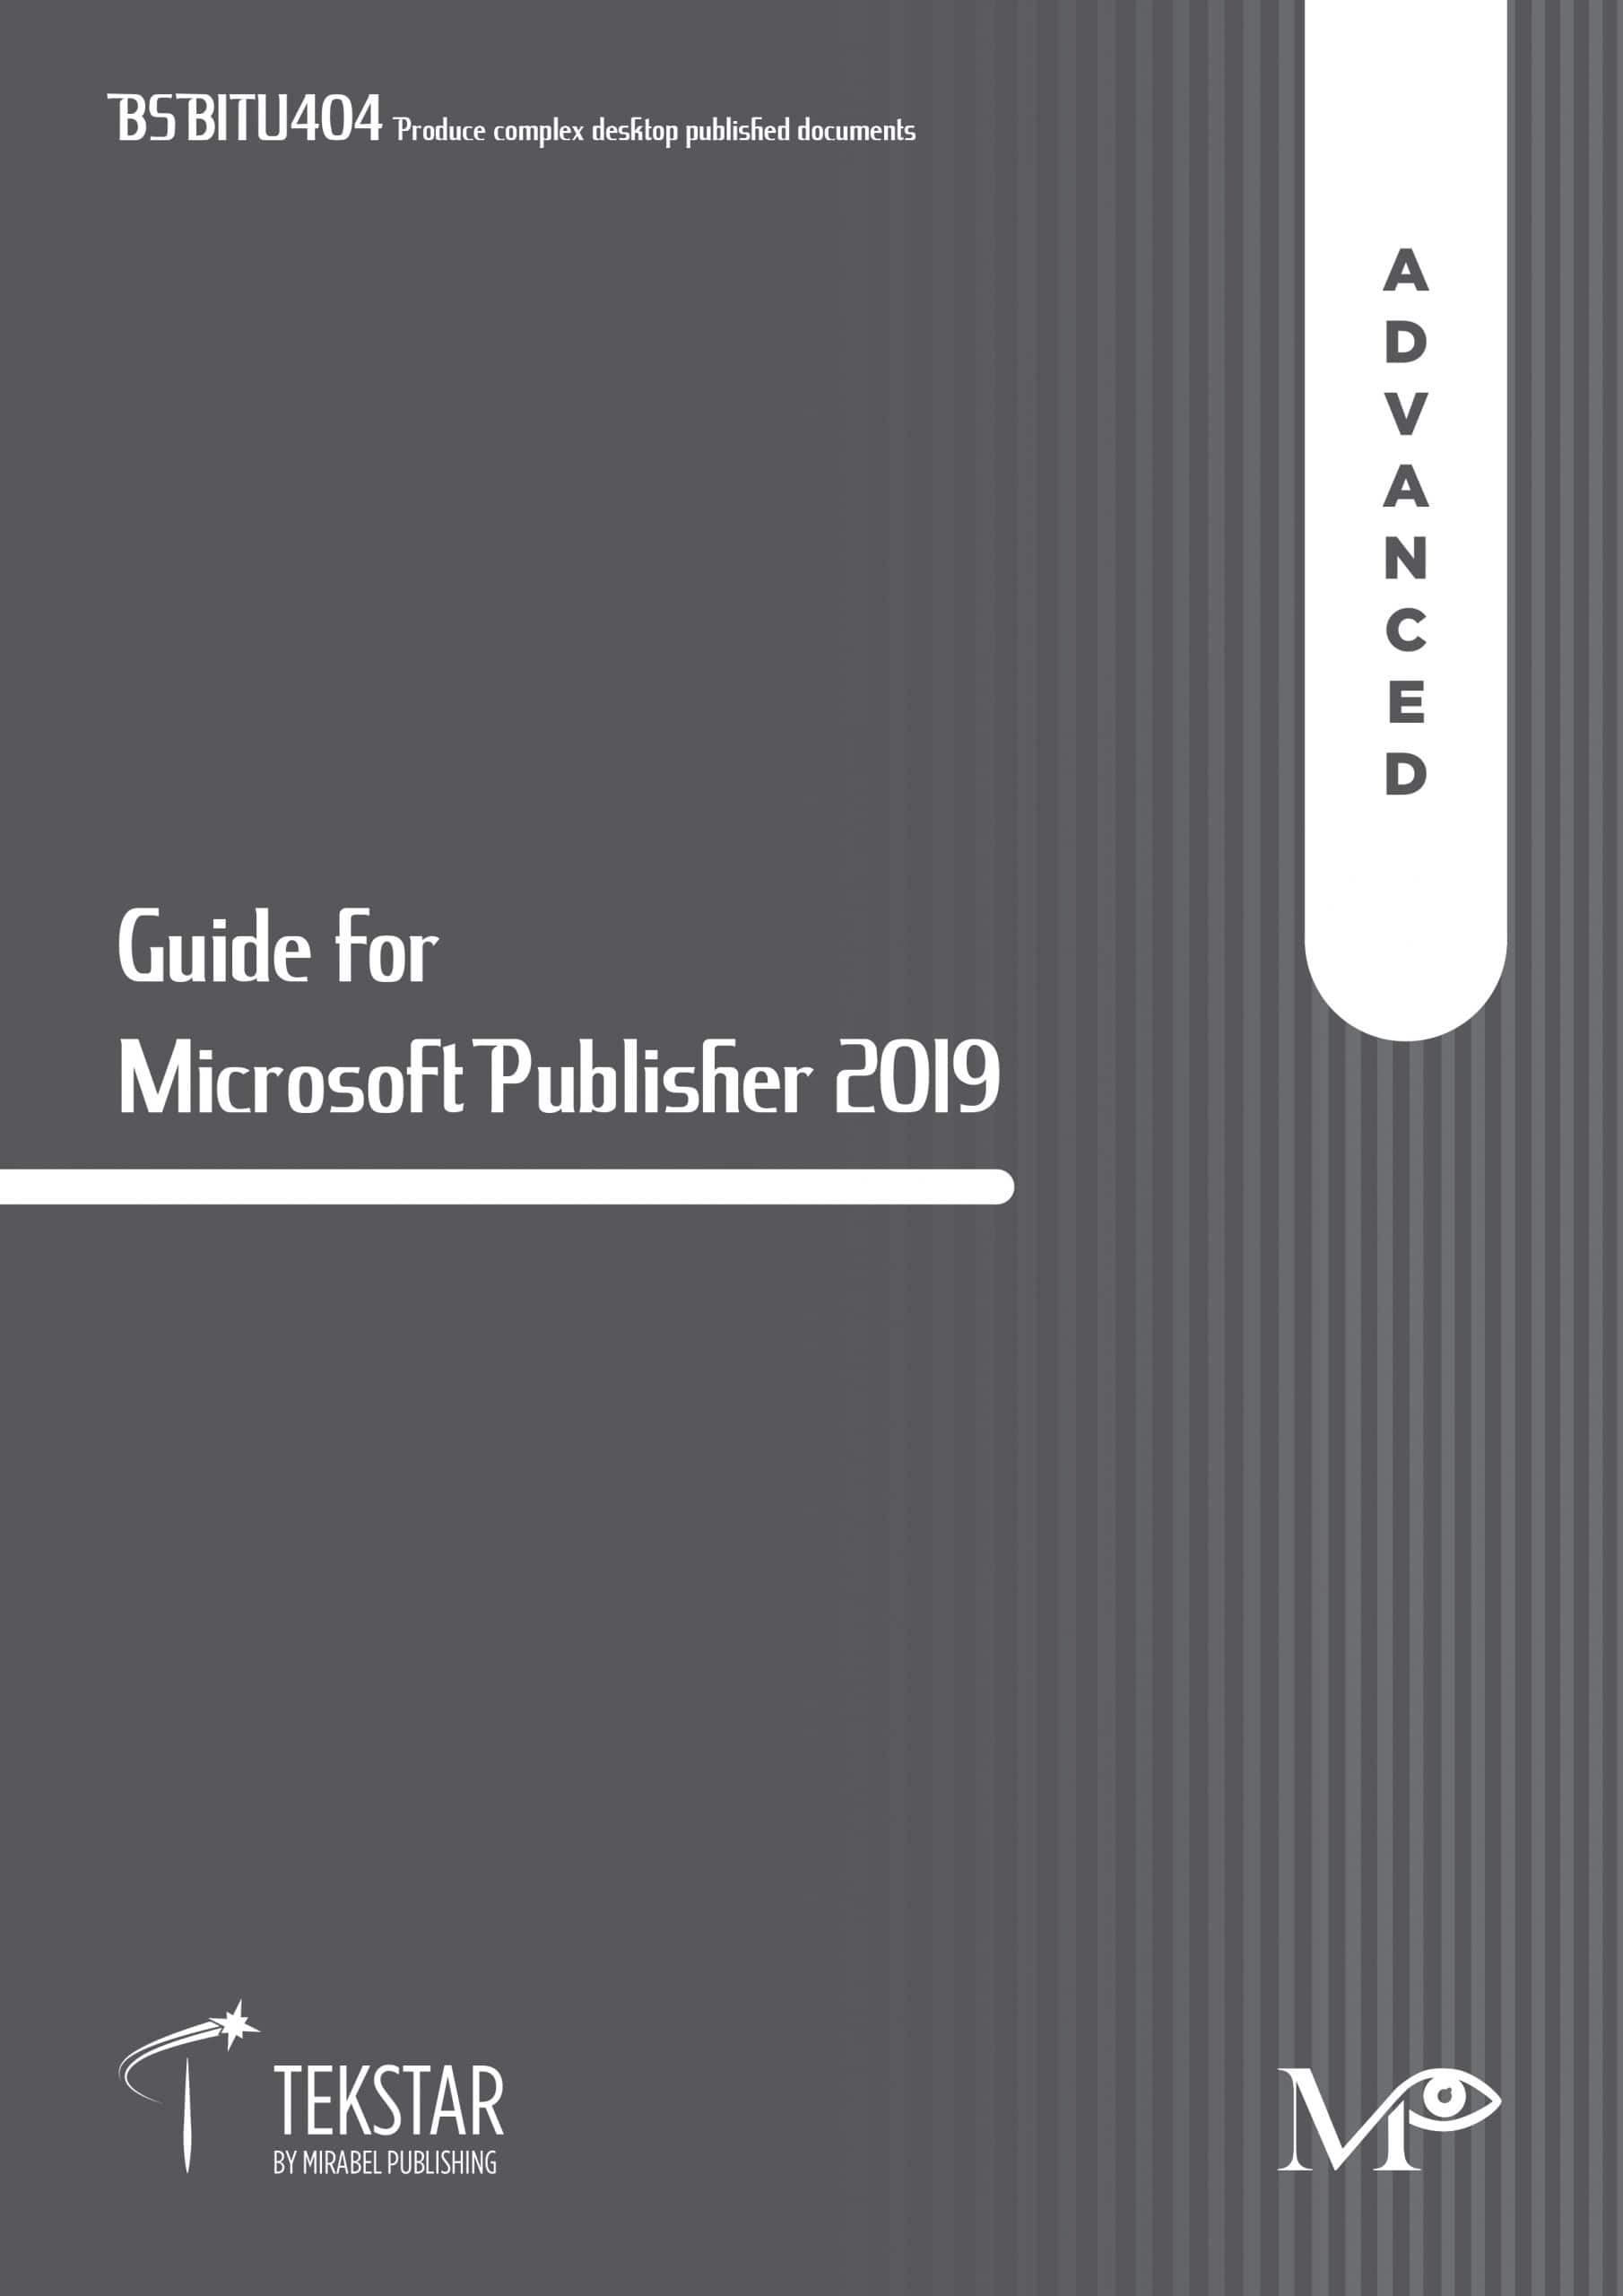 Guide for Microsoft Publisher 2019 - Advanced